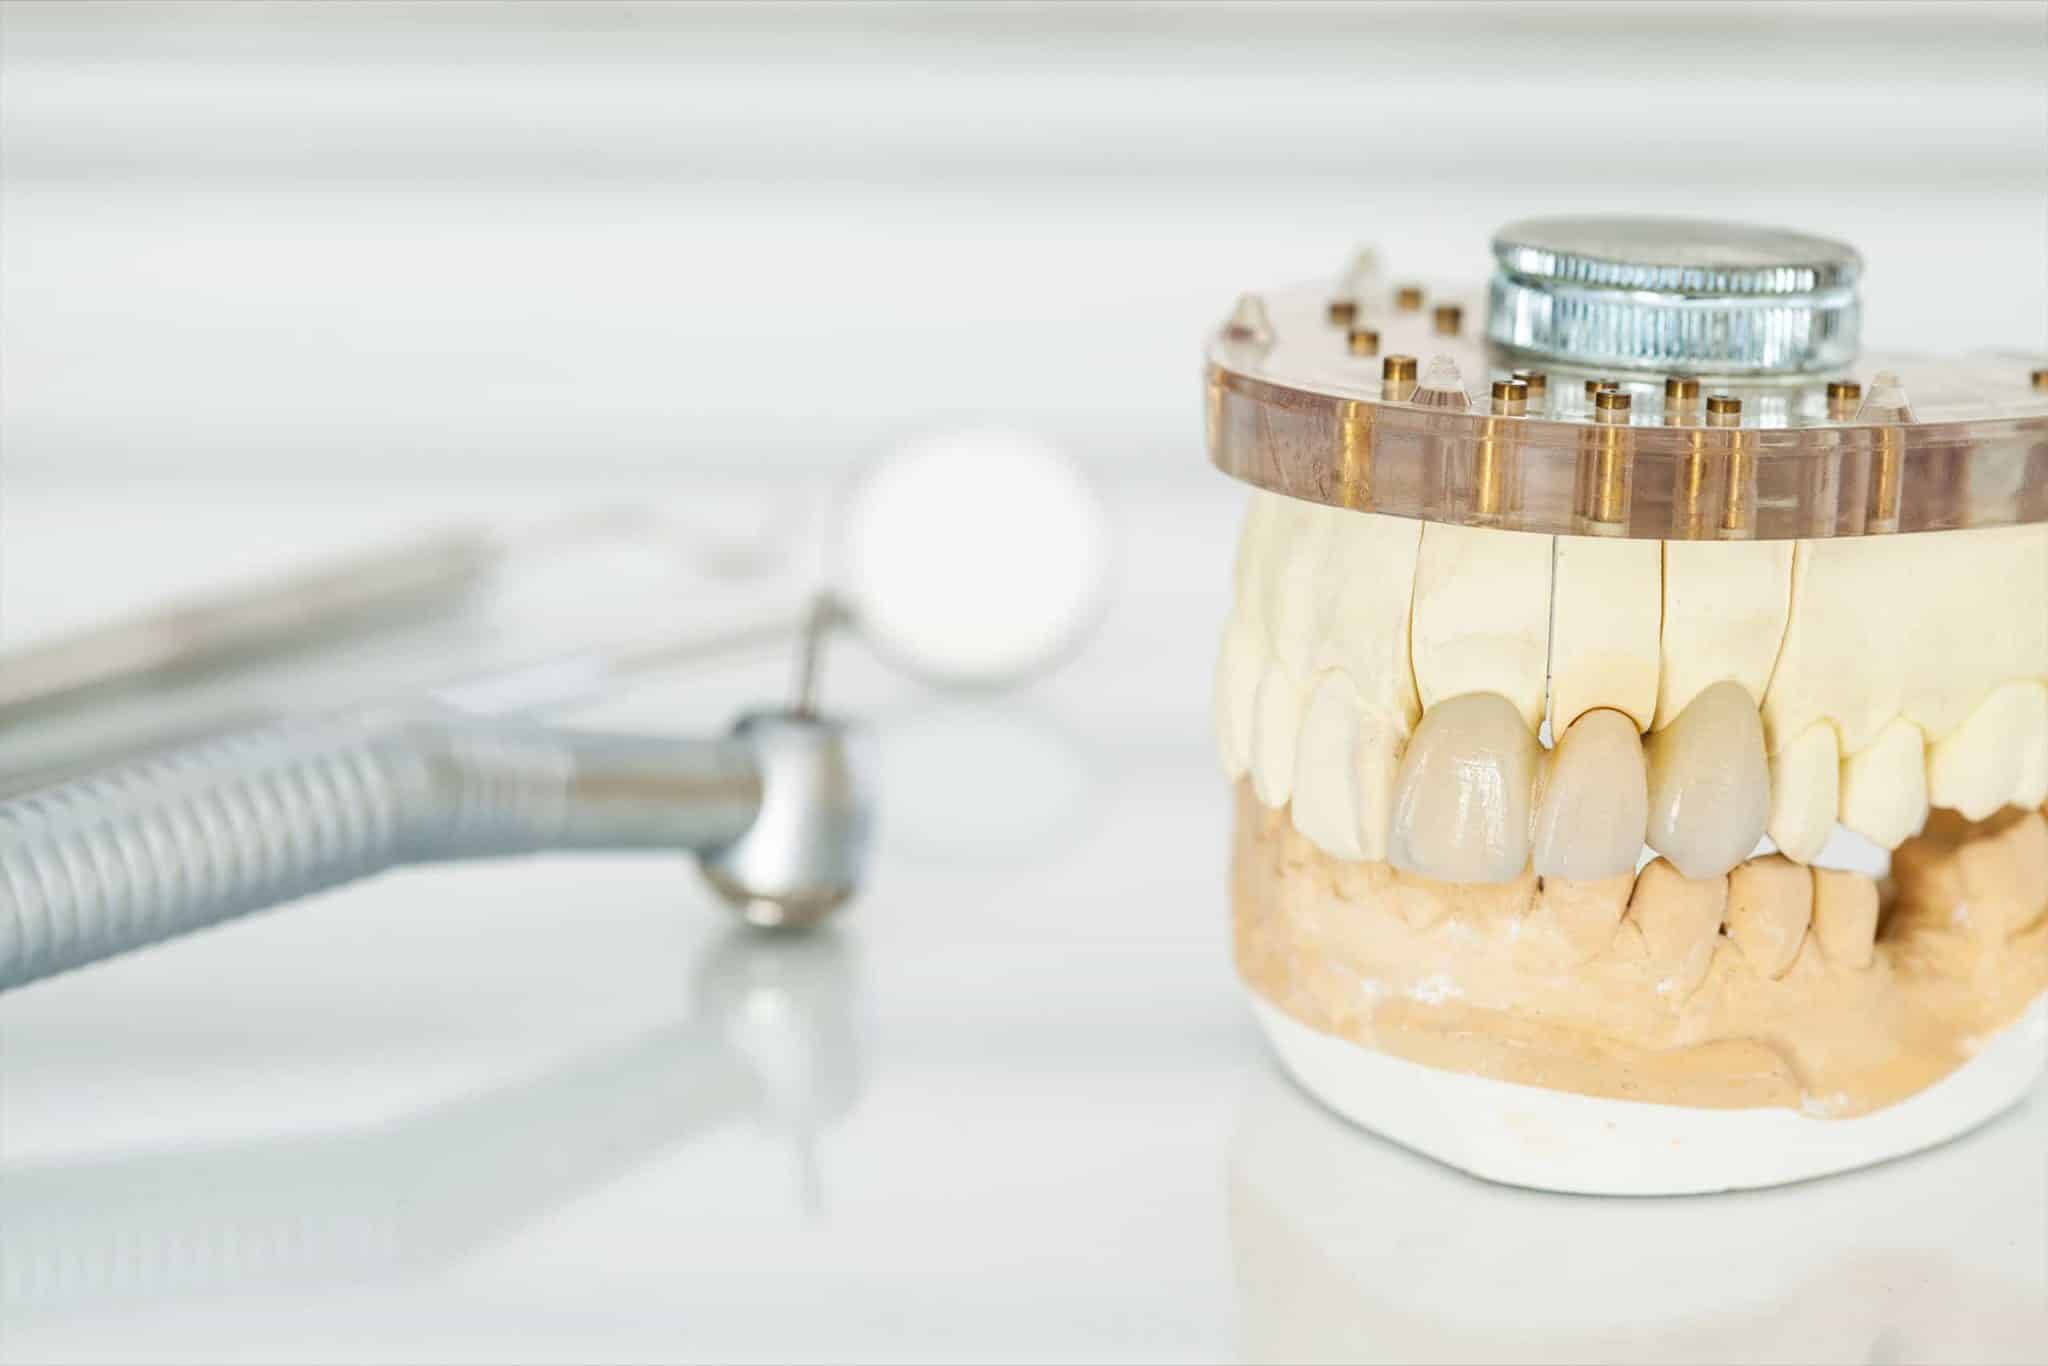 A picture showing some ceramic crowns on a tooth mold.